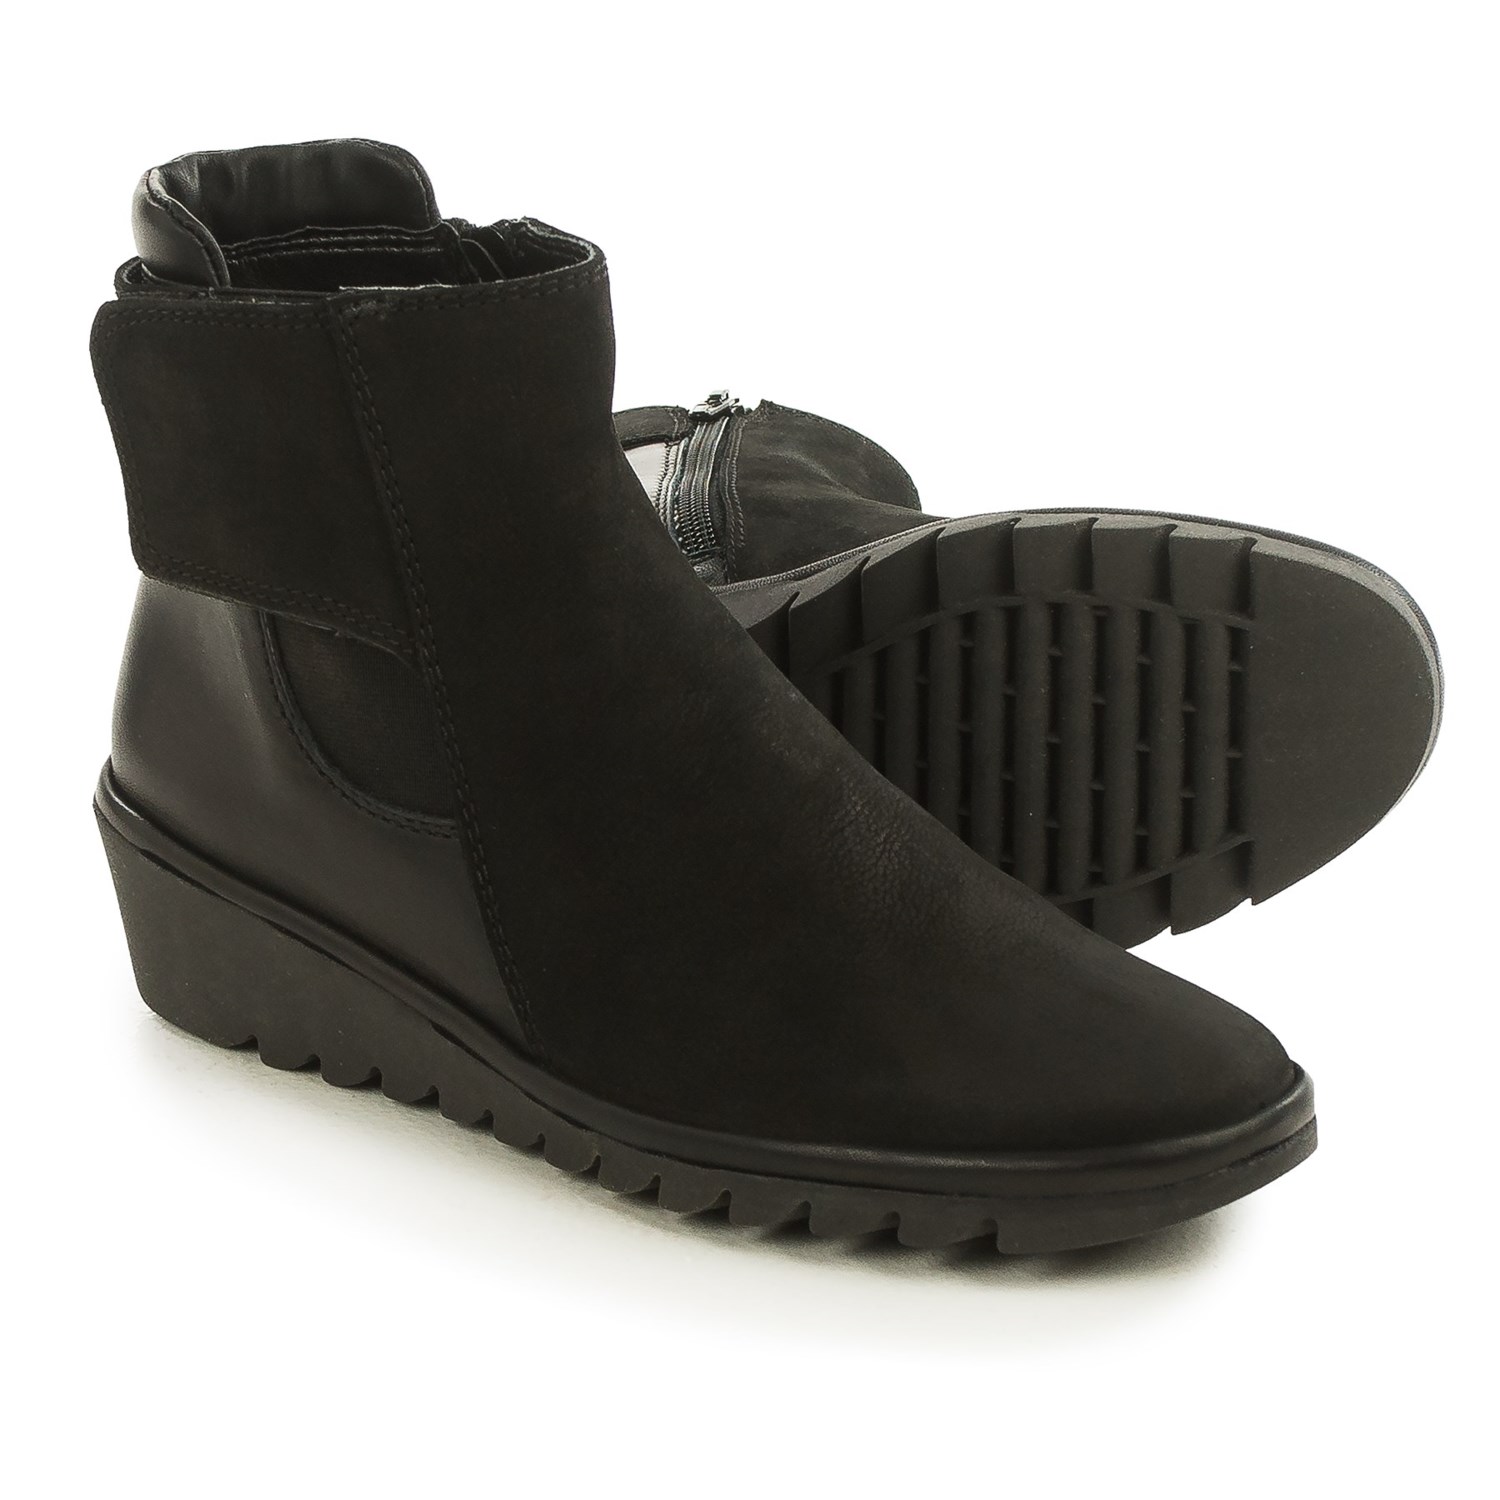 The Flexx Malificent Suede Boots (For Women) - Save 64%